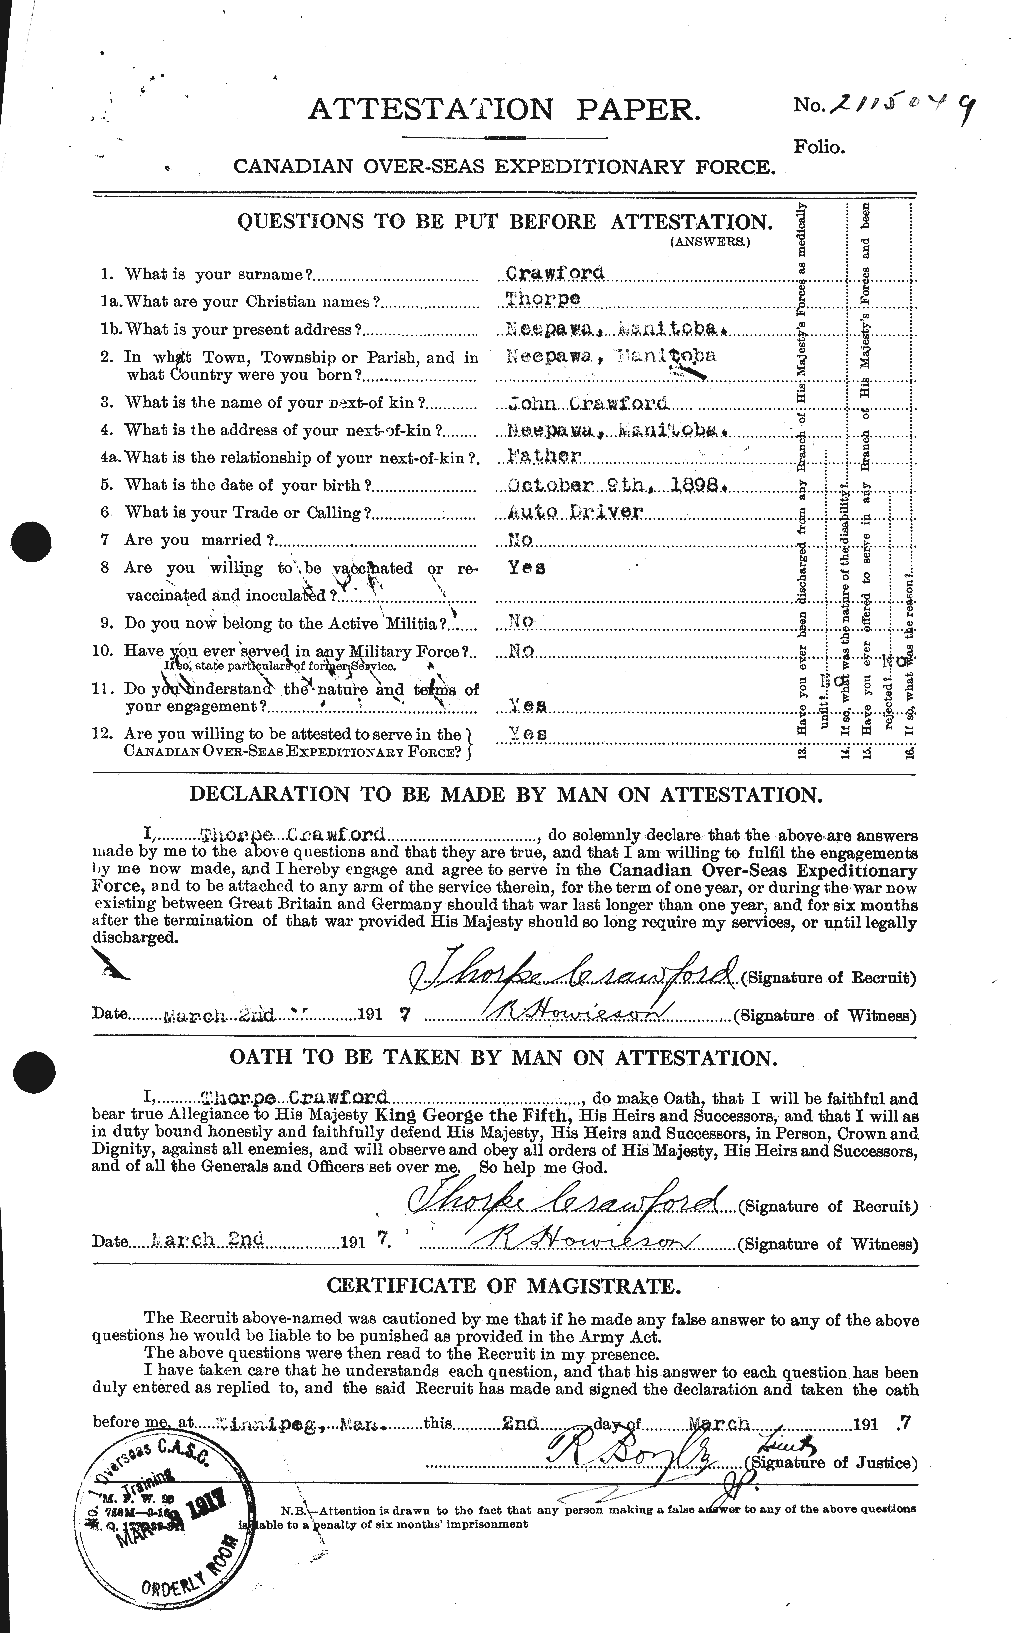 Personnel Records of the First World War - CEF 061346a